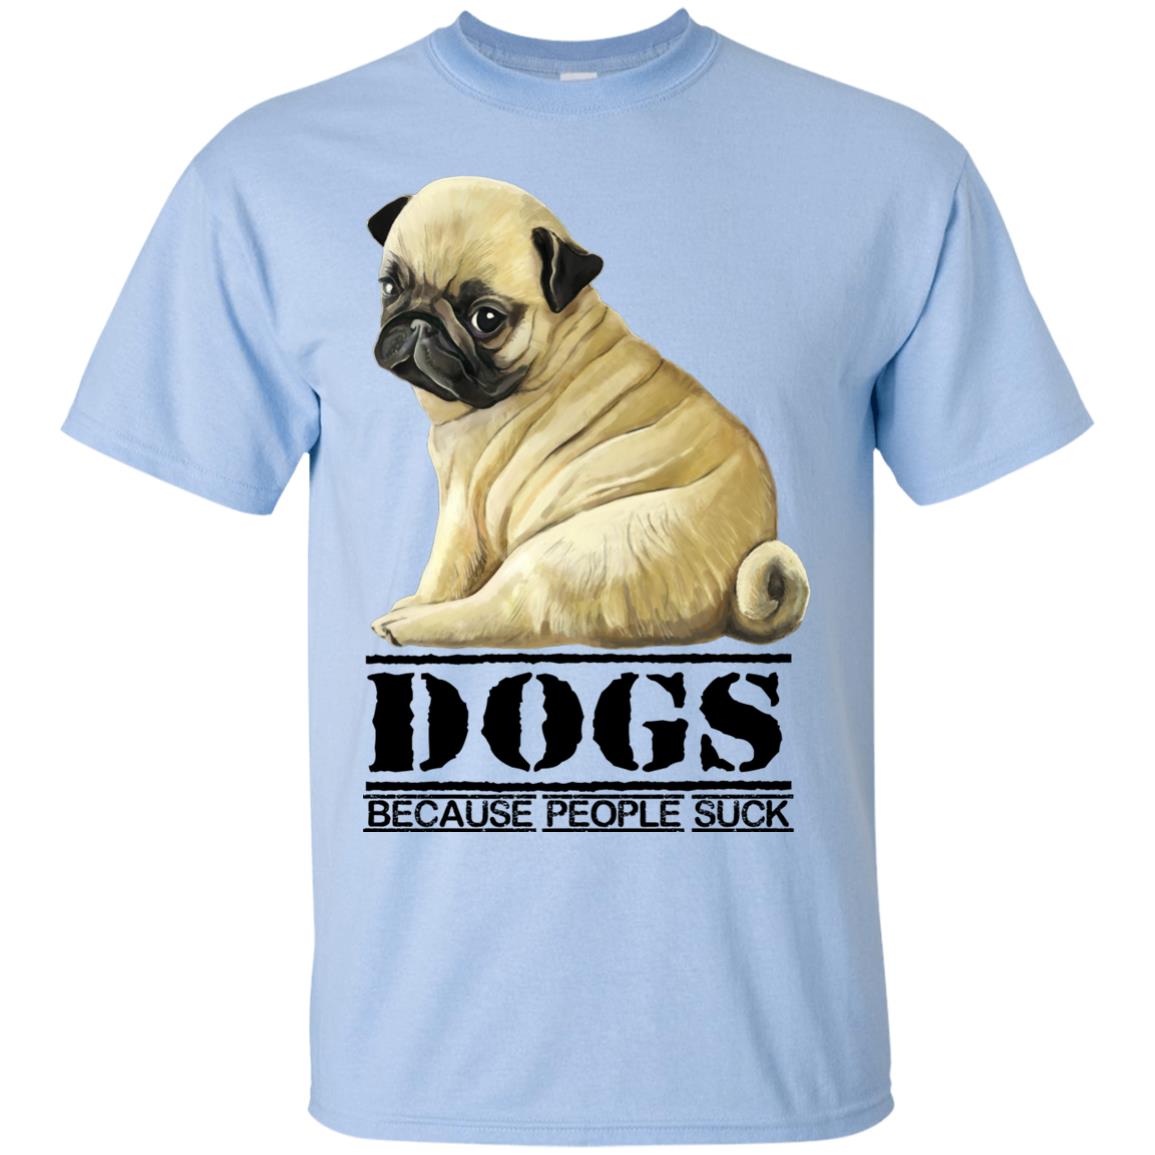 Pug T-Shirt - Funny Shirt for Dog Lover, DOGS Because People Suck - GoneBold.gift